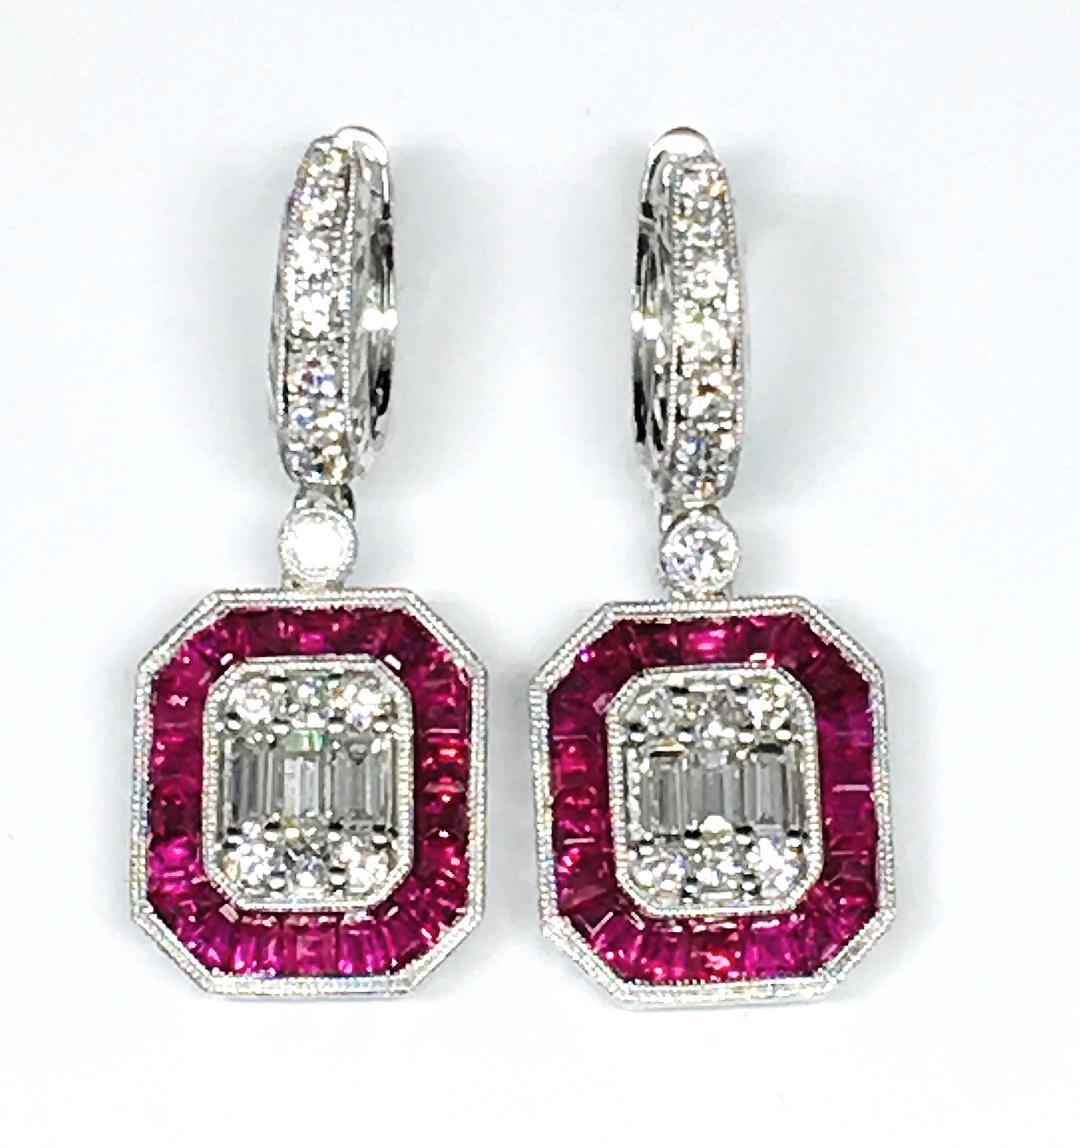 METAL : White Gold
METAL PURITY : 18k
44 /Ruby 2.60 TOTAL CARAT WEIGHT
4 Princess Cut Diamond 0.15 CARAT
6 Baguettes Diamond 0.41 CARAT
24 Round Diamond 0.60 CARAT
COLOR : F
CLARITY : VS2
COMES WITH AUTHENTICITY PAPERS.